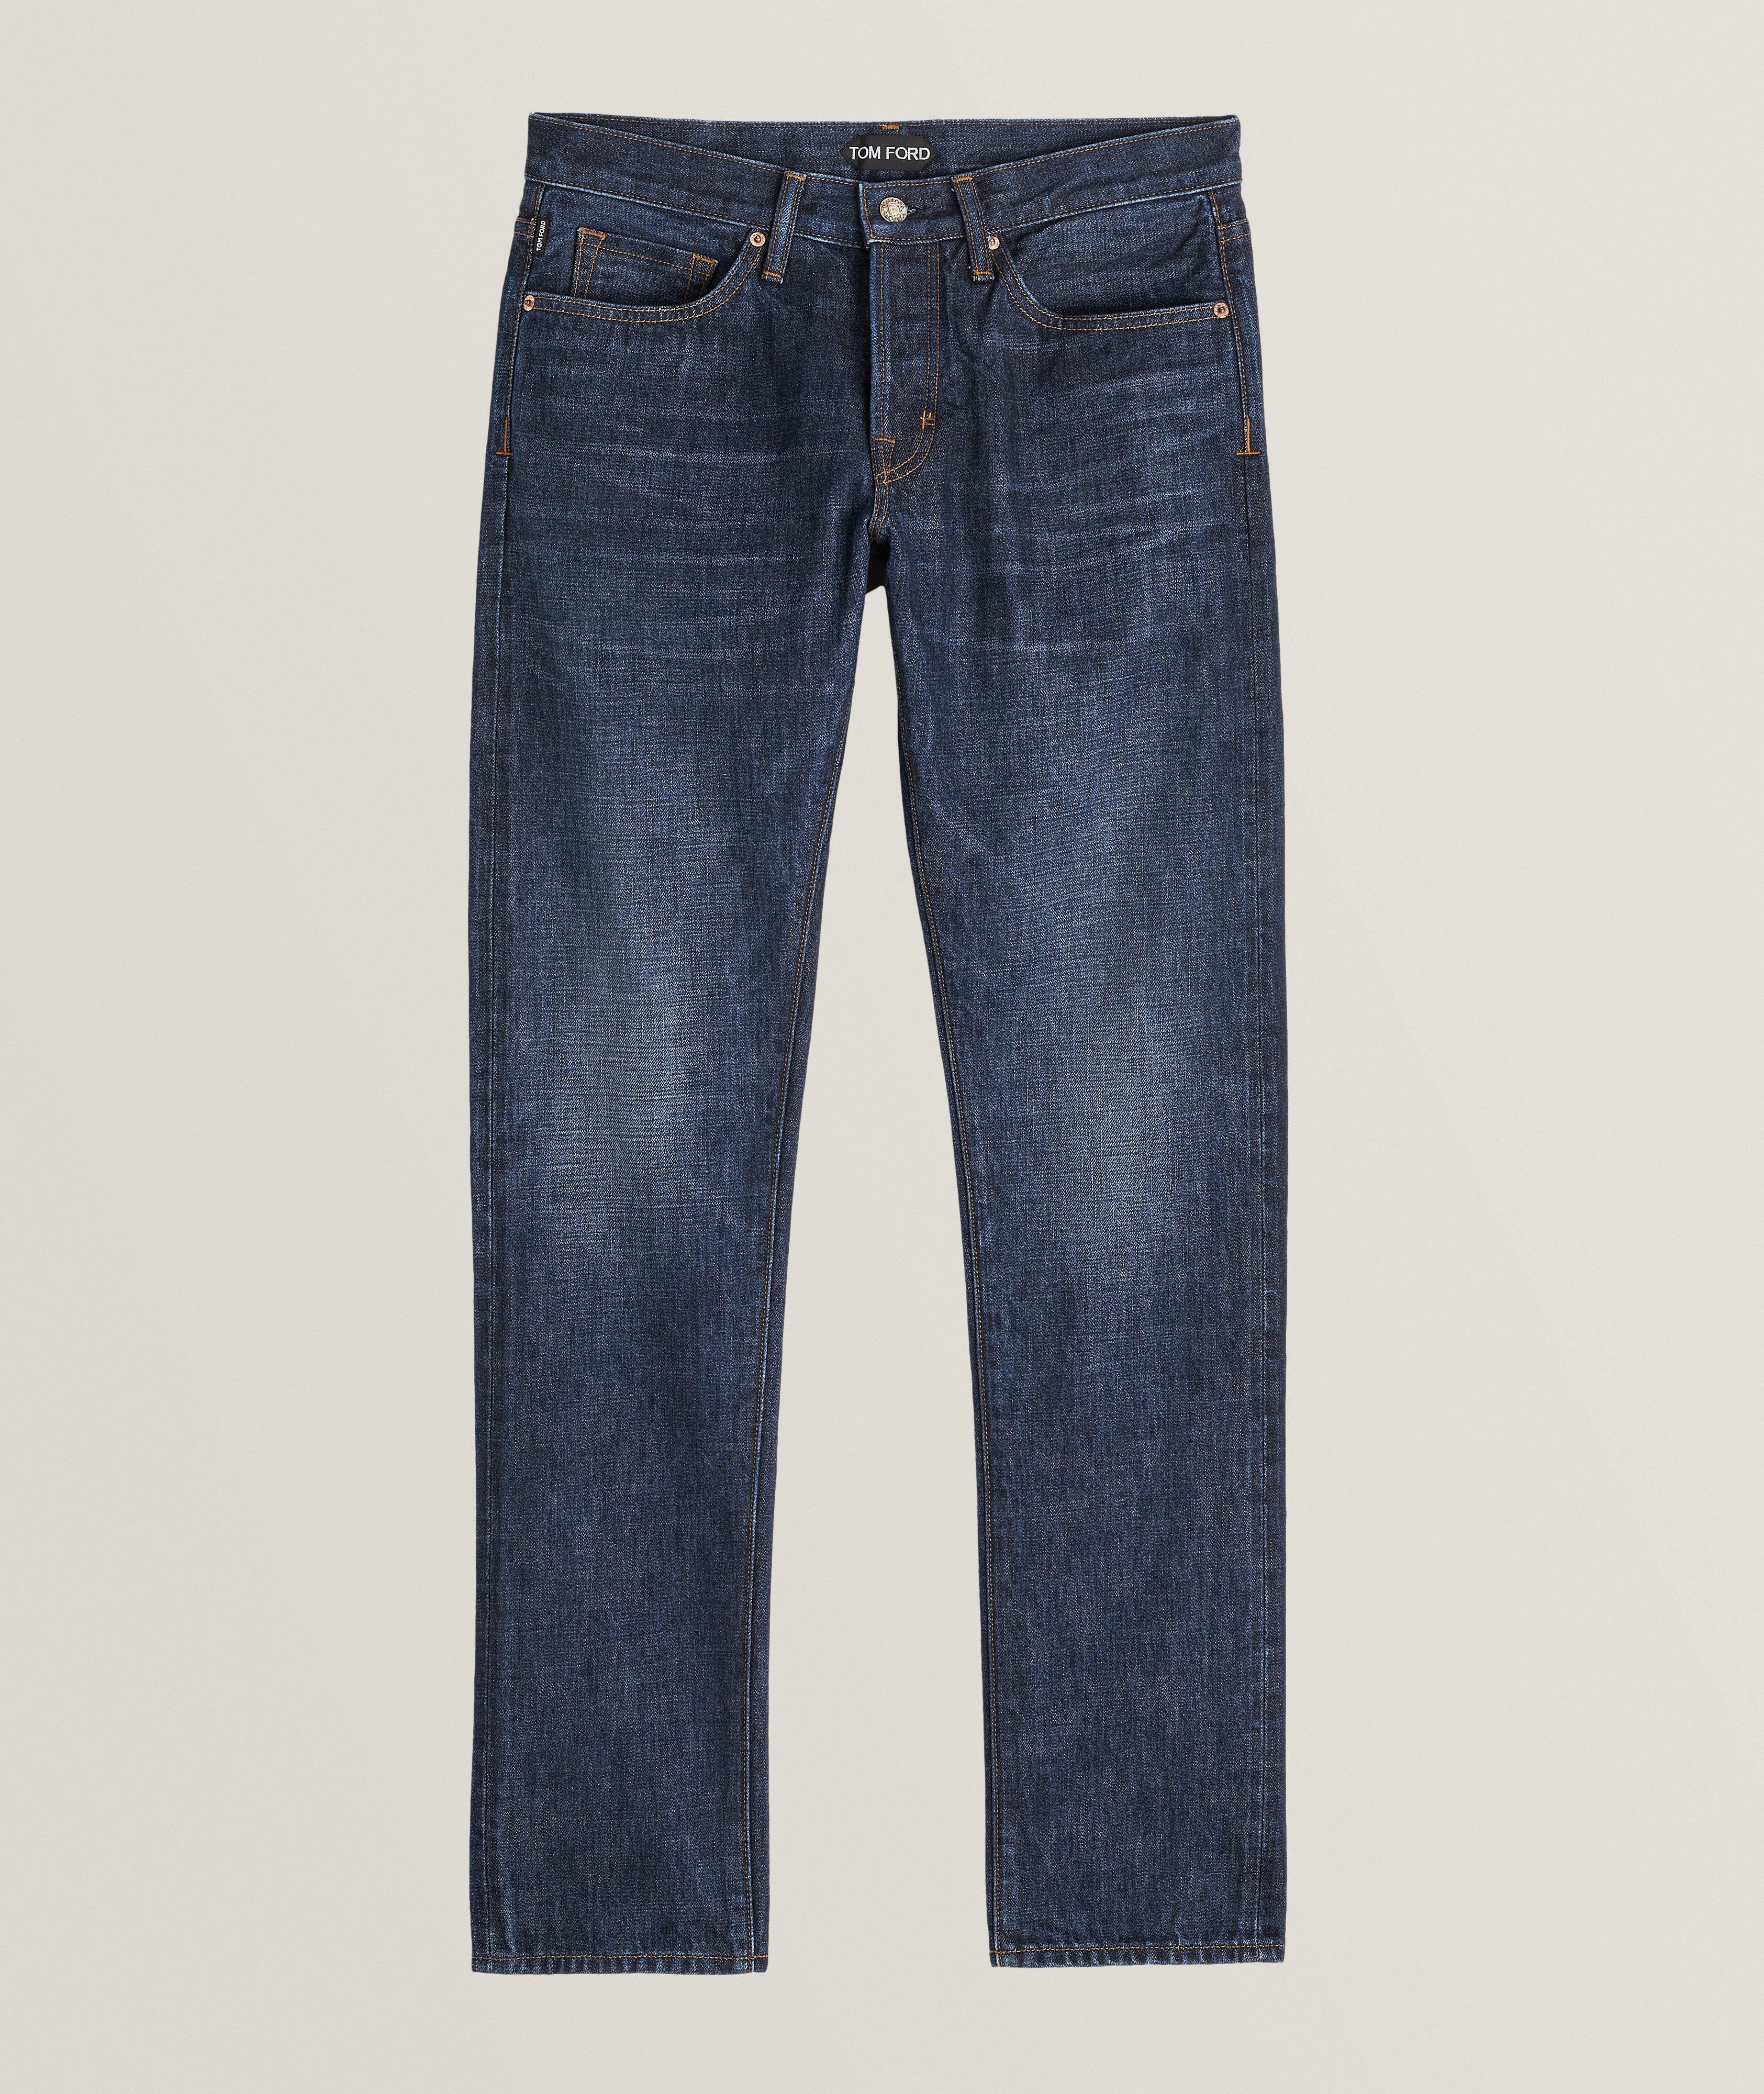 TOM FORD Slim-Fit Japanese Selvedge Cotton Jeans